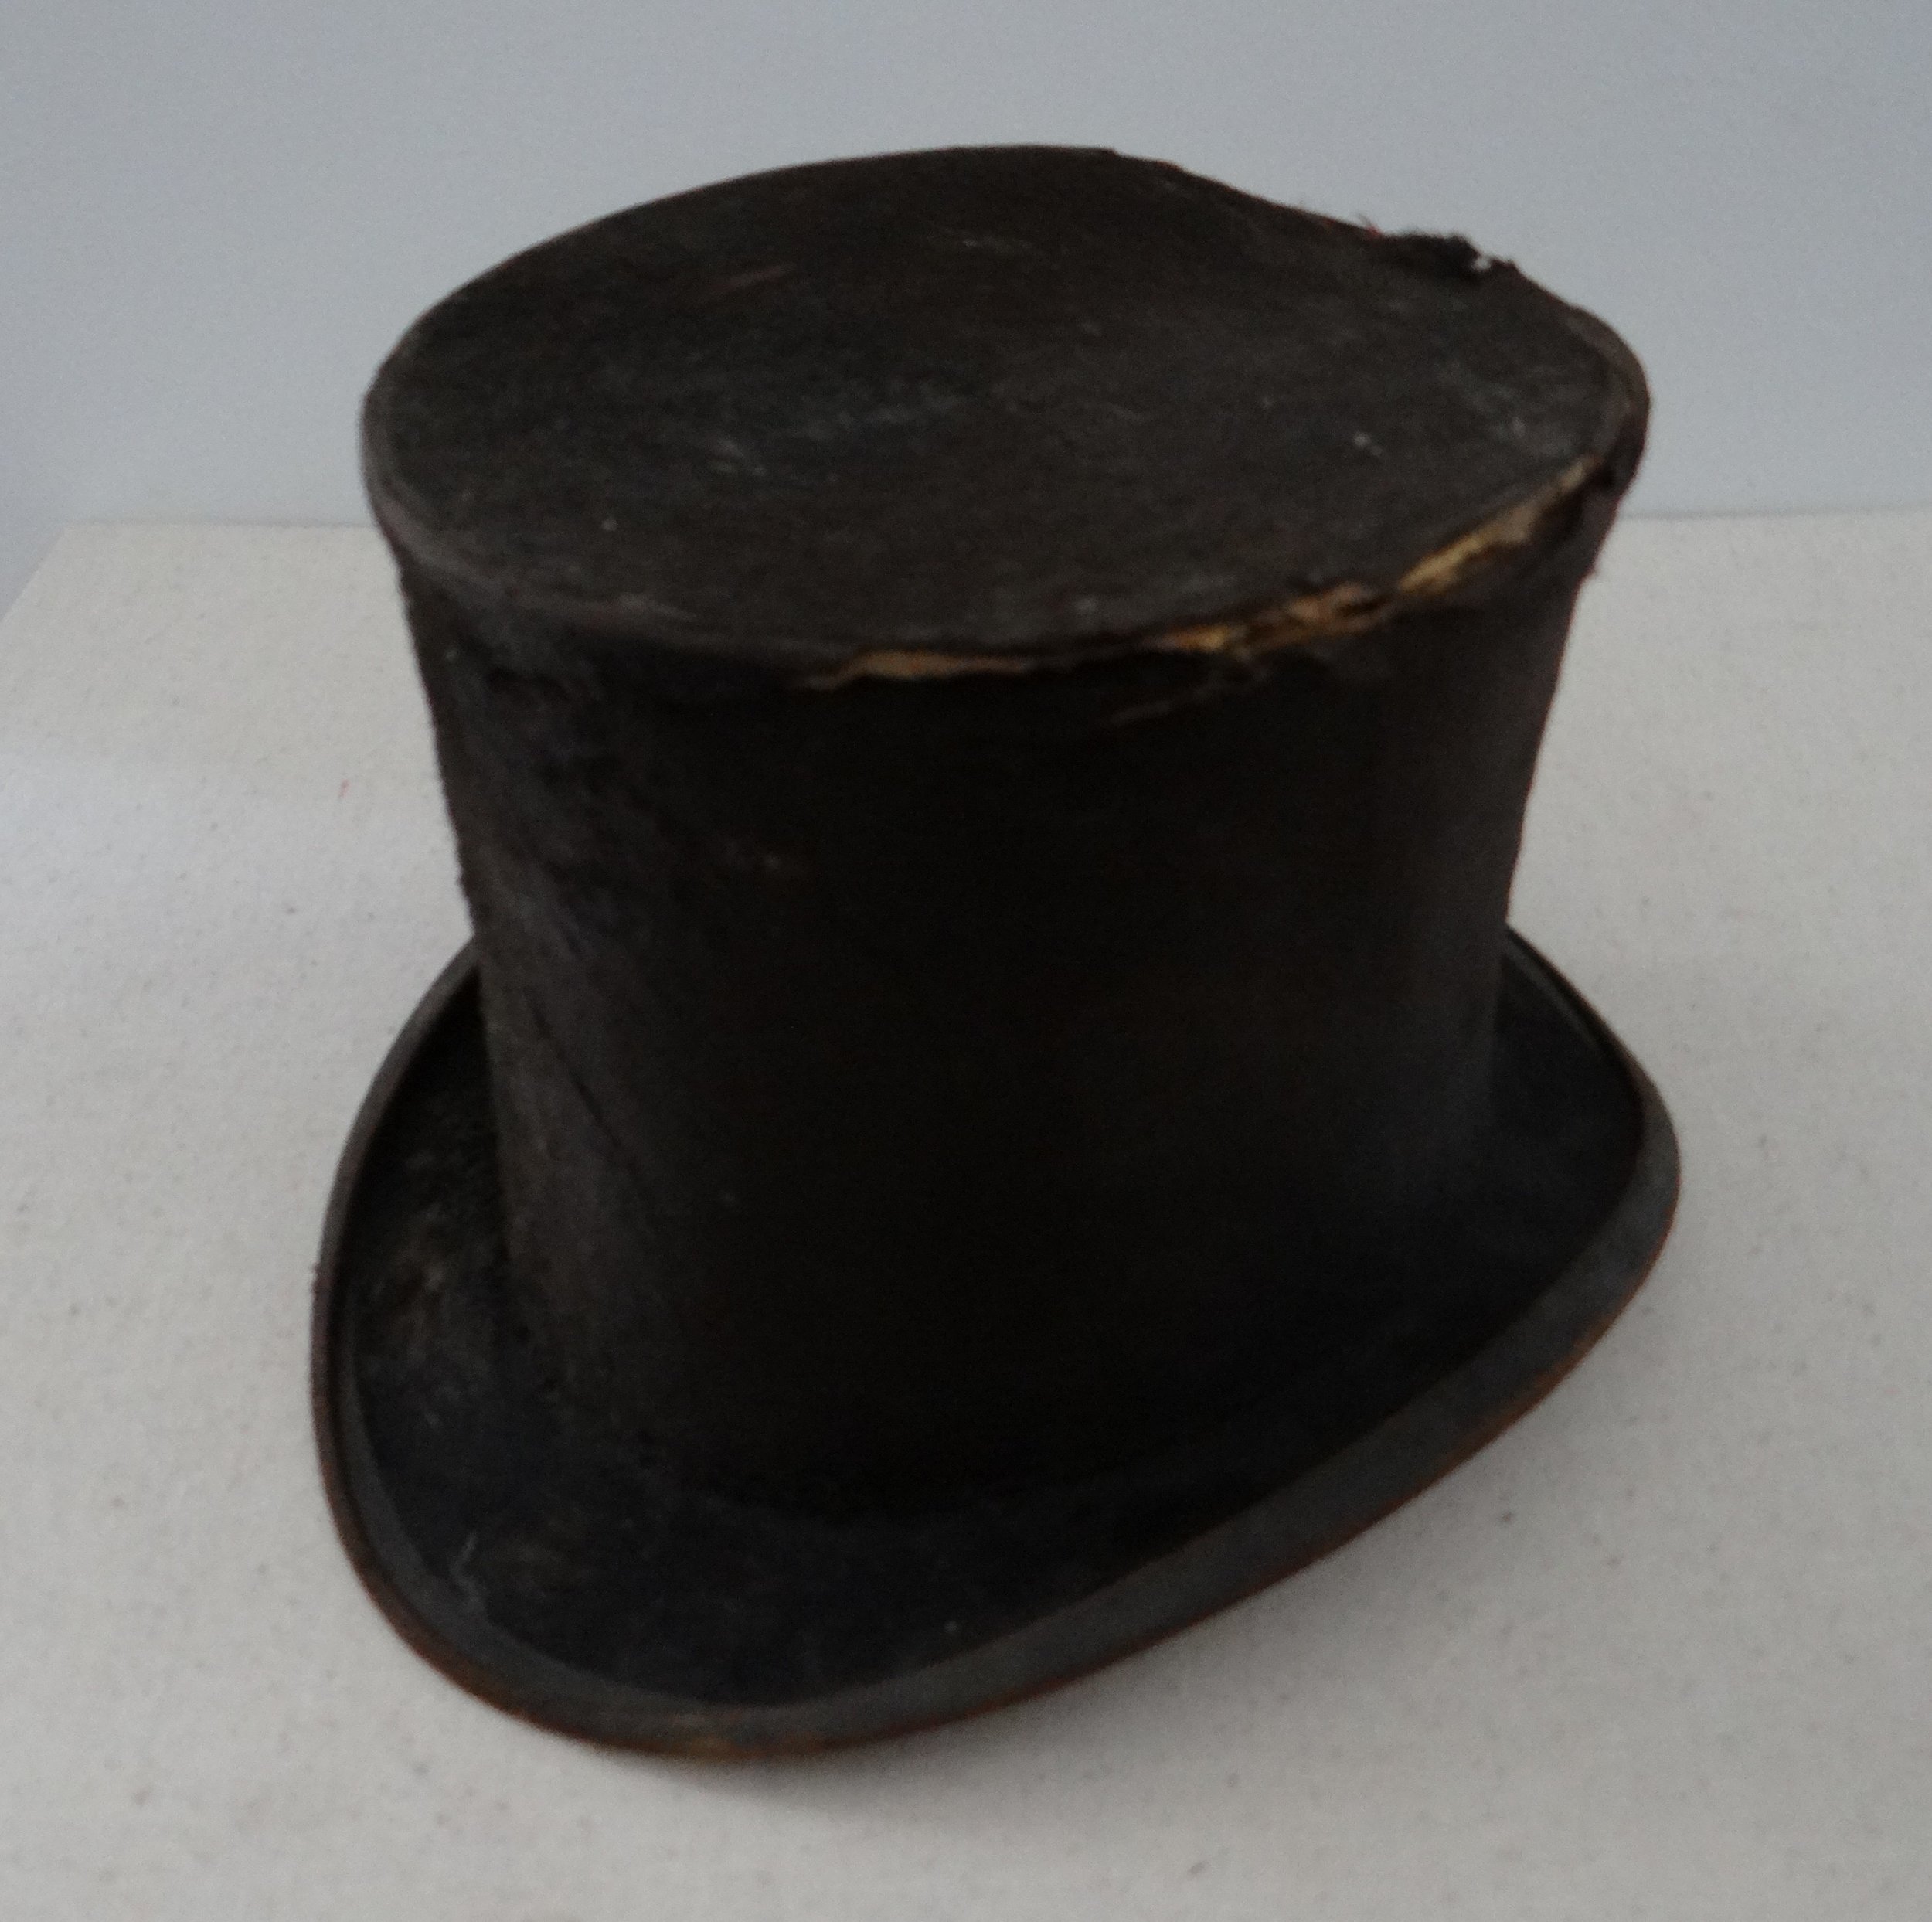   Top Hat. Hilborn, Philadelphia, PA, Inscribed-Trade Mark/Hilborn/218 Market St./Philadelphia, c1860. Robert Kirkbride of Burlington County wore this hat to Abraham Lincoln’s inauguration. His descendants moved to Harrison Township and brought the h